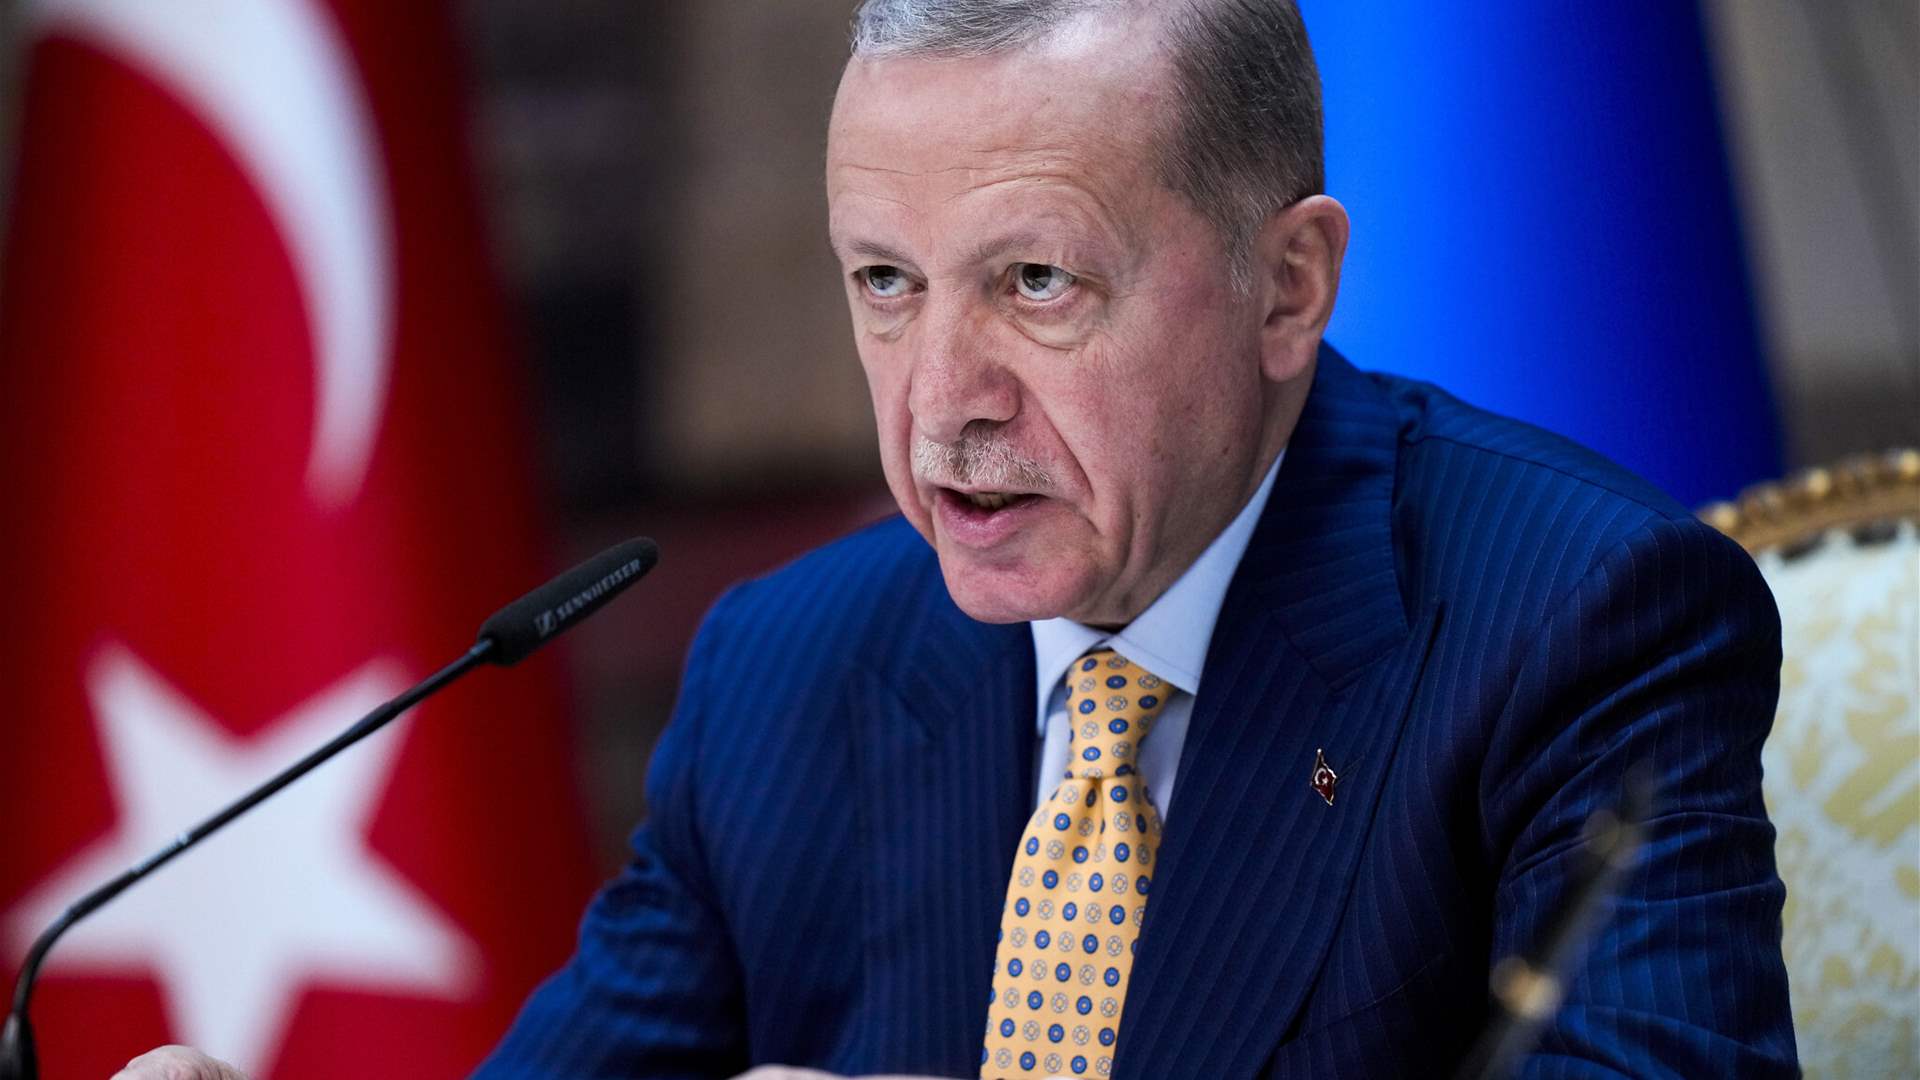 Erdogan welcomes Norway, Ireland, and Spain&#39;s decision to recognize Palestinian state